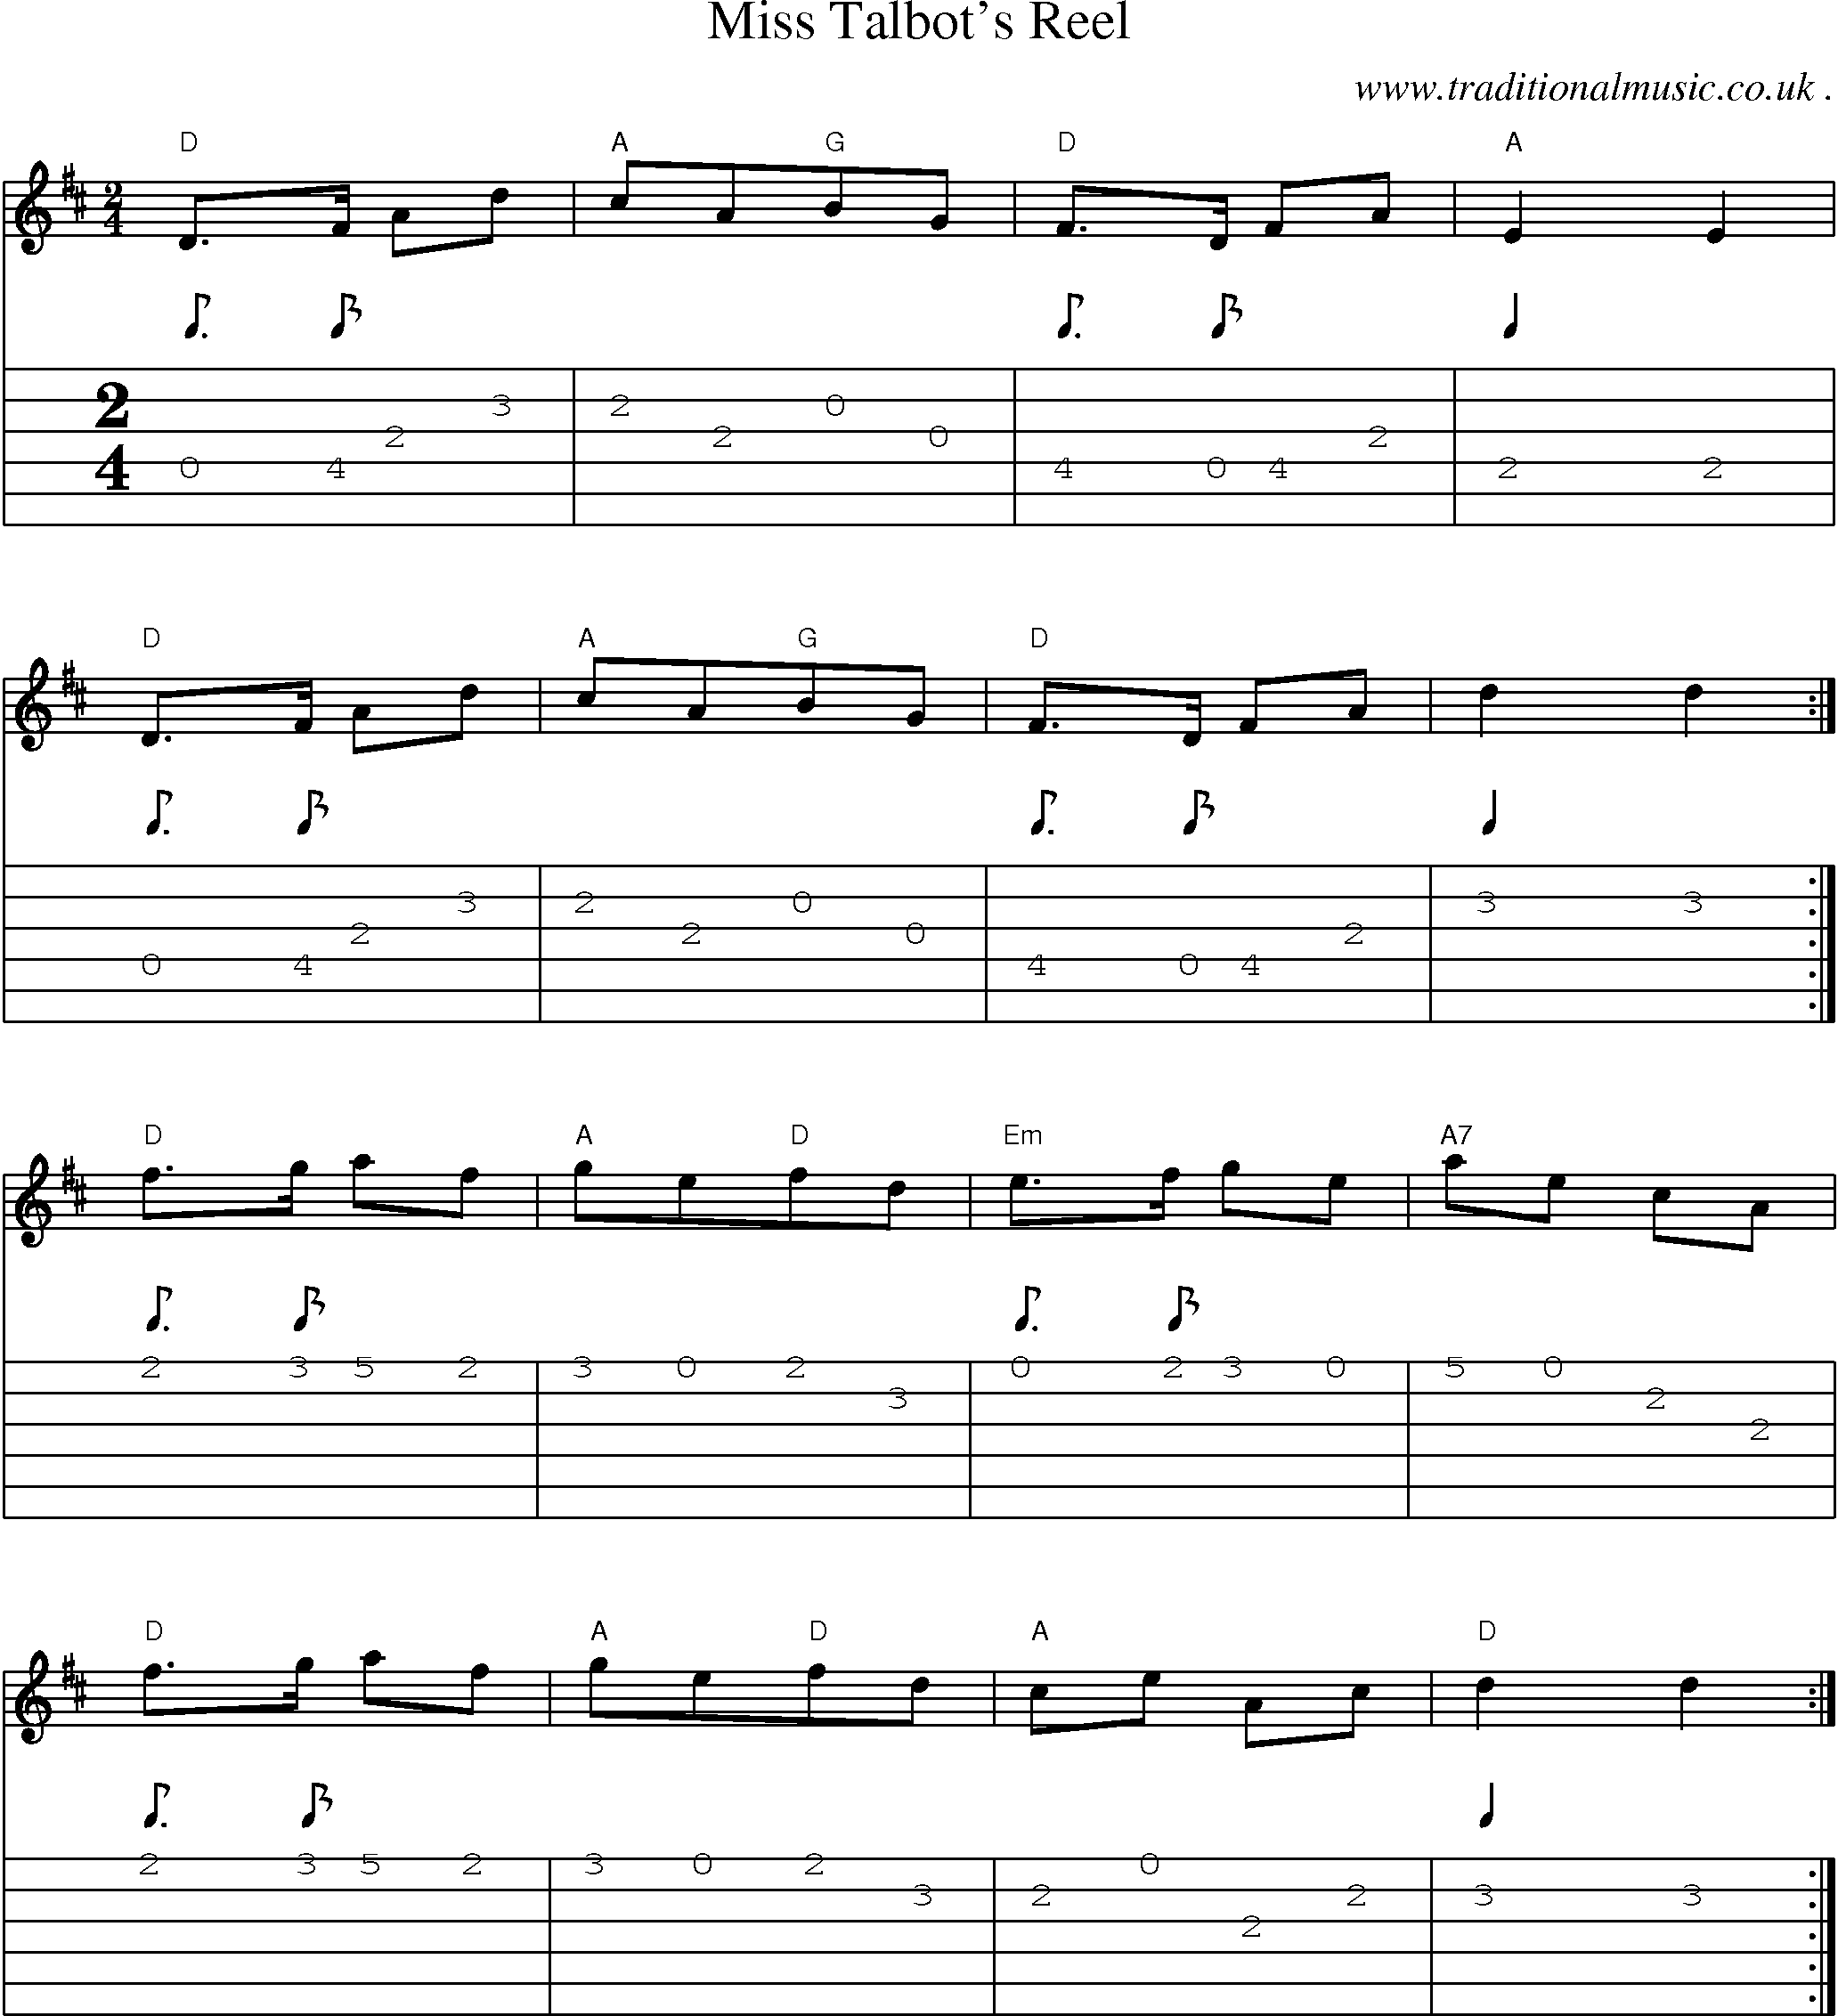 Sheet-Music and Guitar Tabs for Miss Talbots Reel